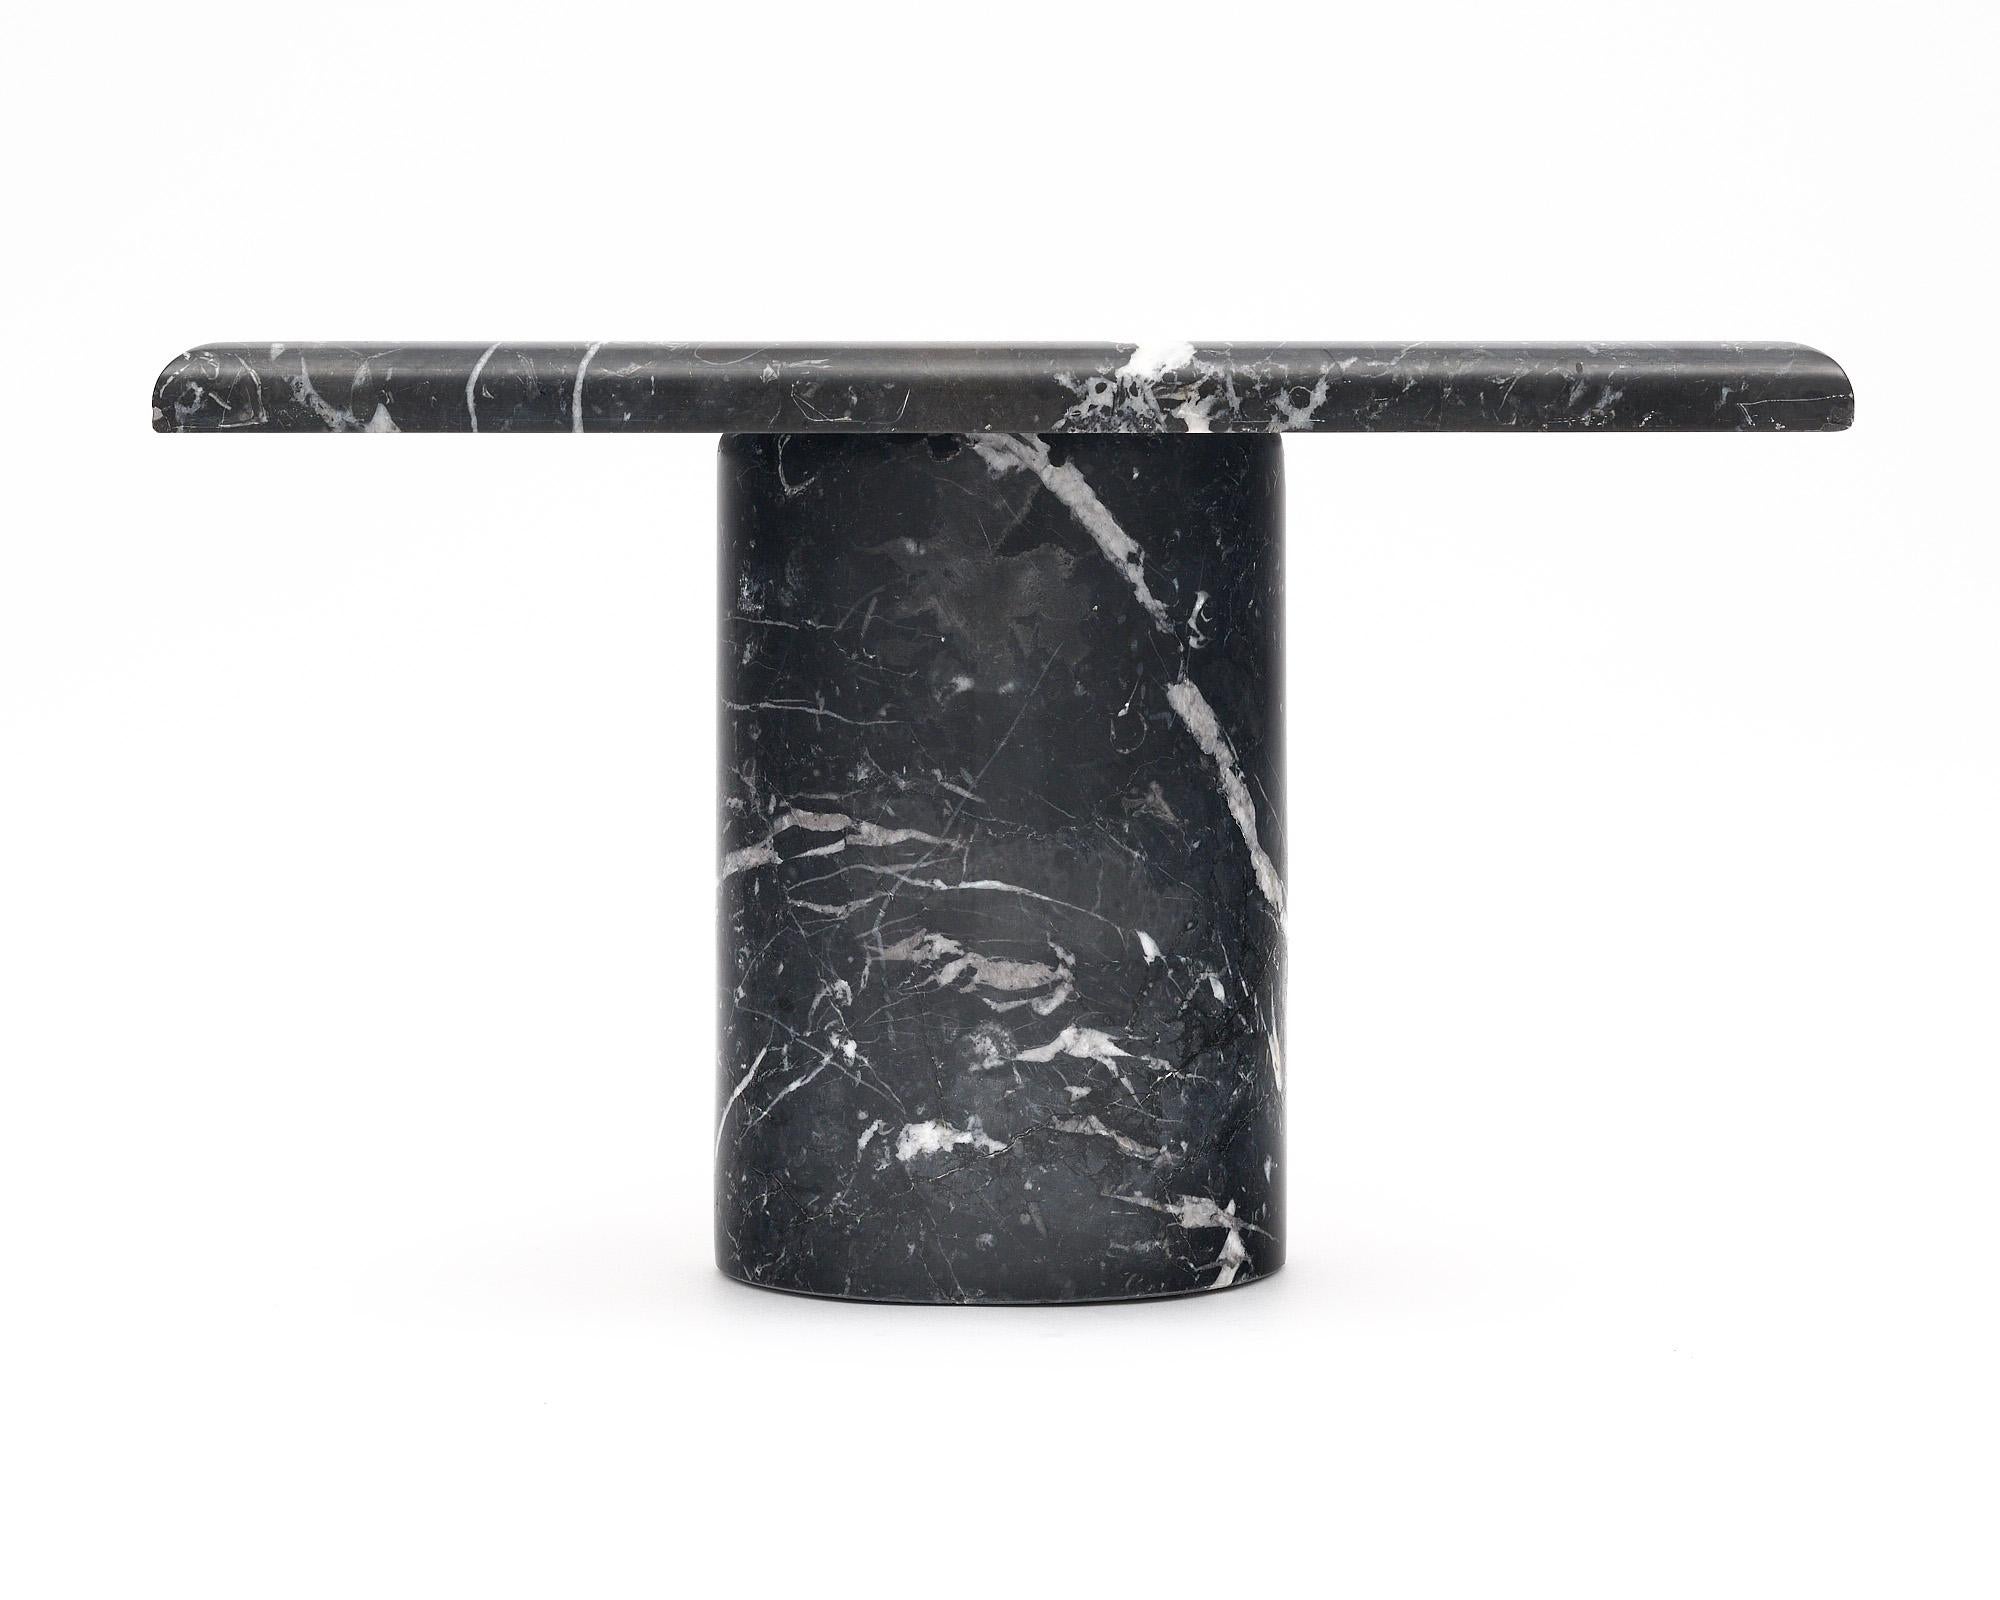 Side table from Italy with a sleek design. This vintage piece is made entirely of black marble with a striking white veining throughout. The cylindrical base holds the square slab top.
